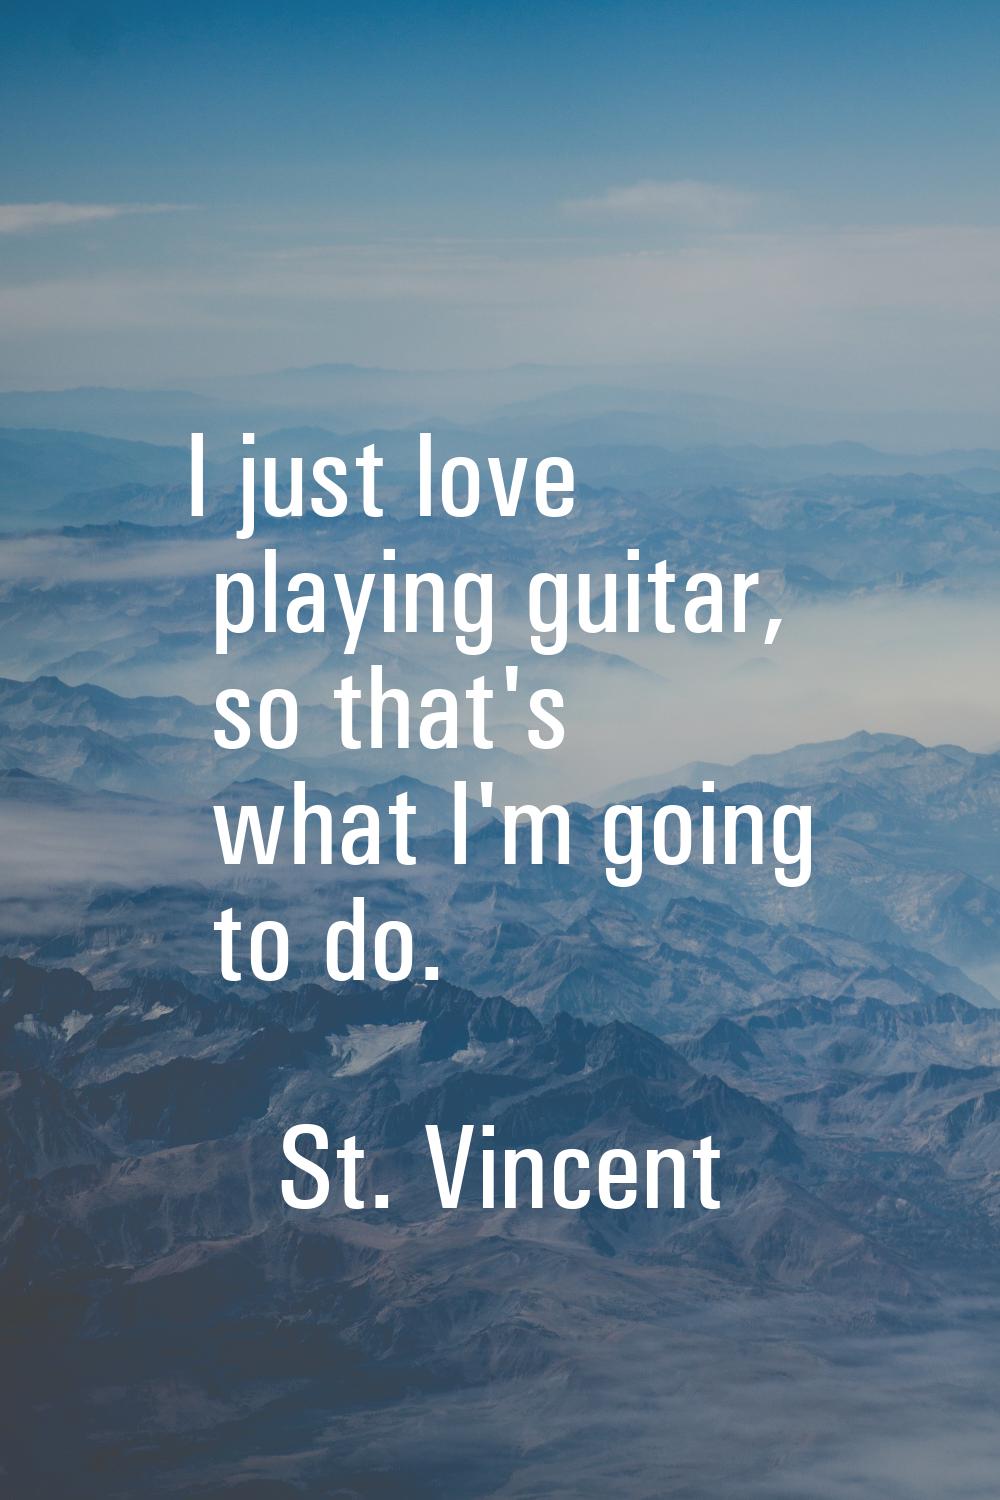 I just love playing guitar, so that's what I'm going to do.